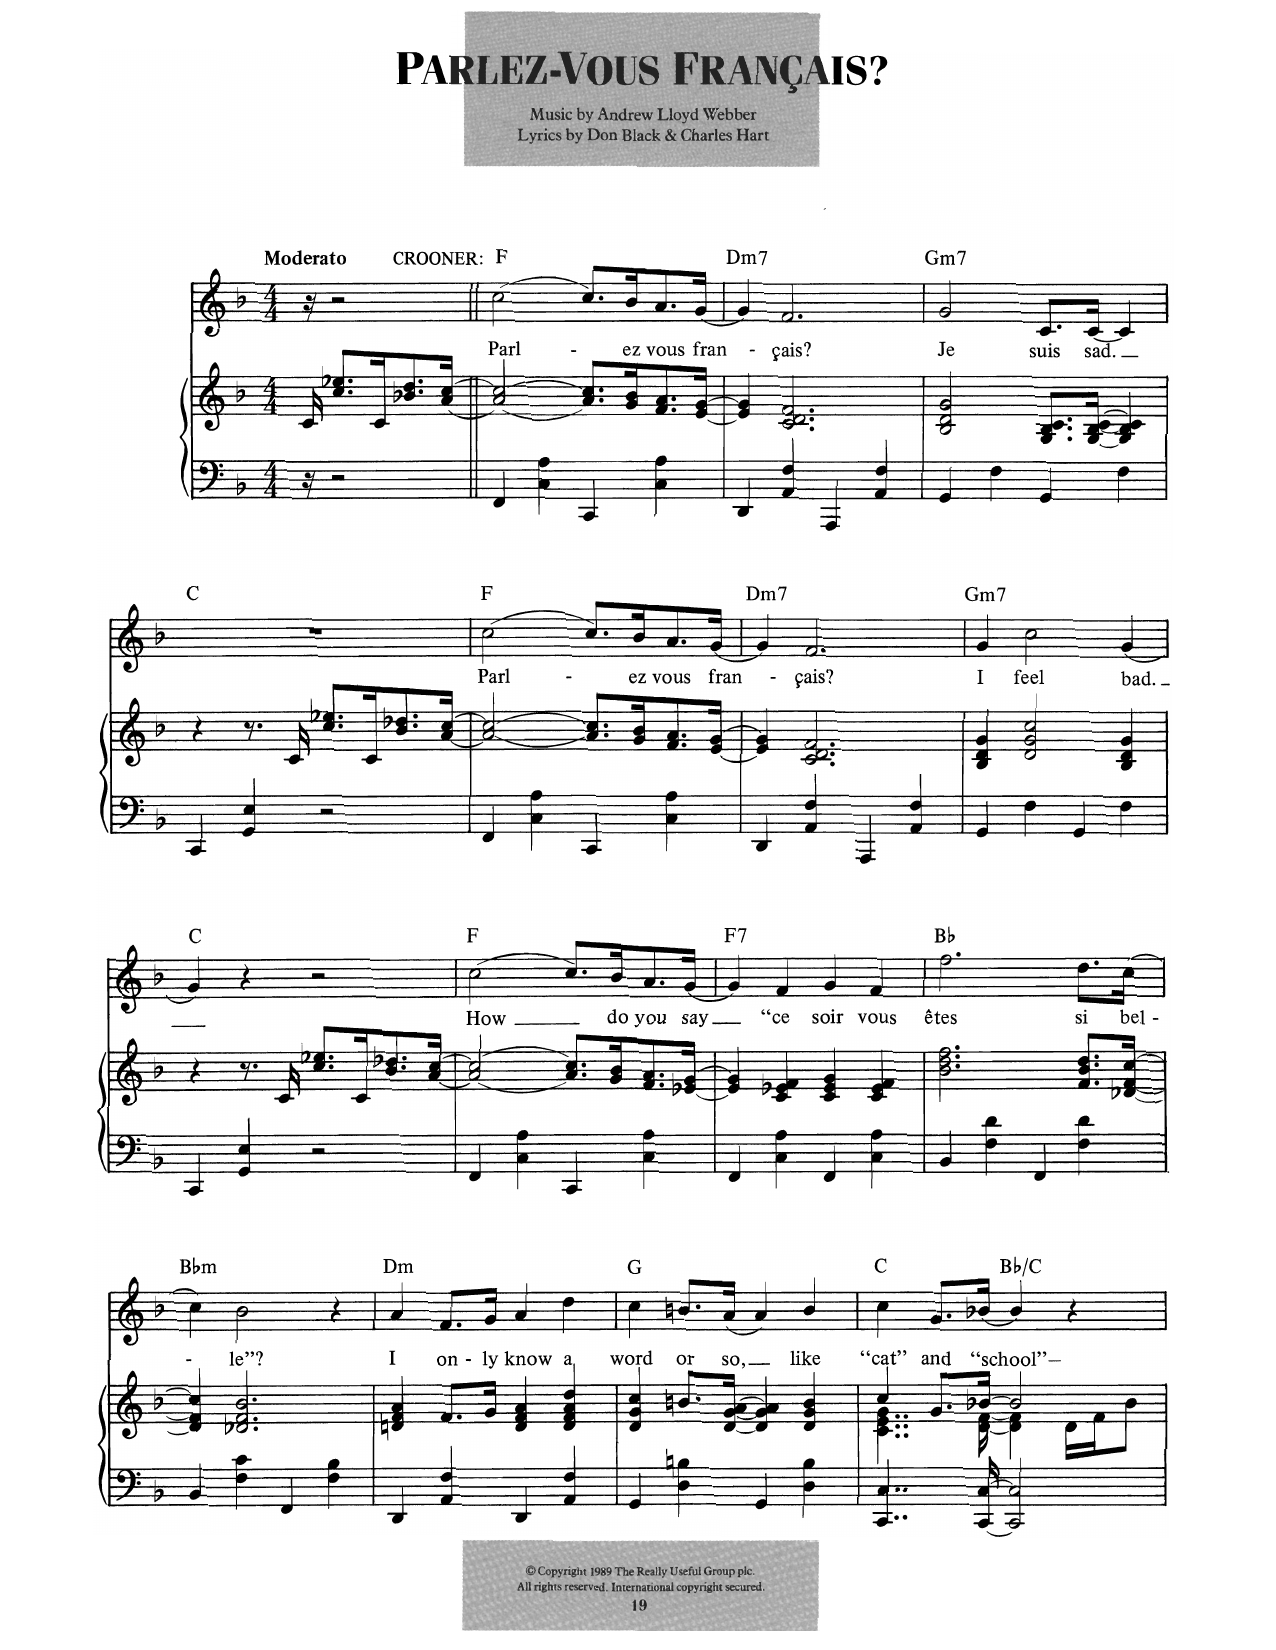 Download Andrew Lloyd Webber Parlez-vous Francais? (from Aspects Of Sheet Music